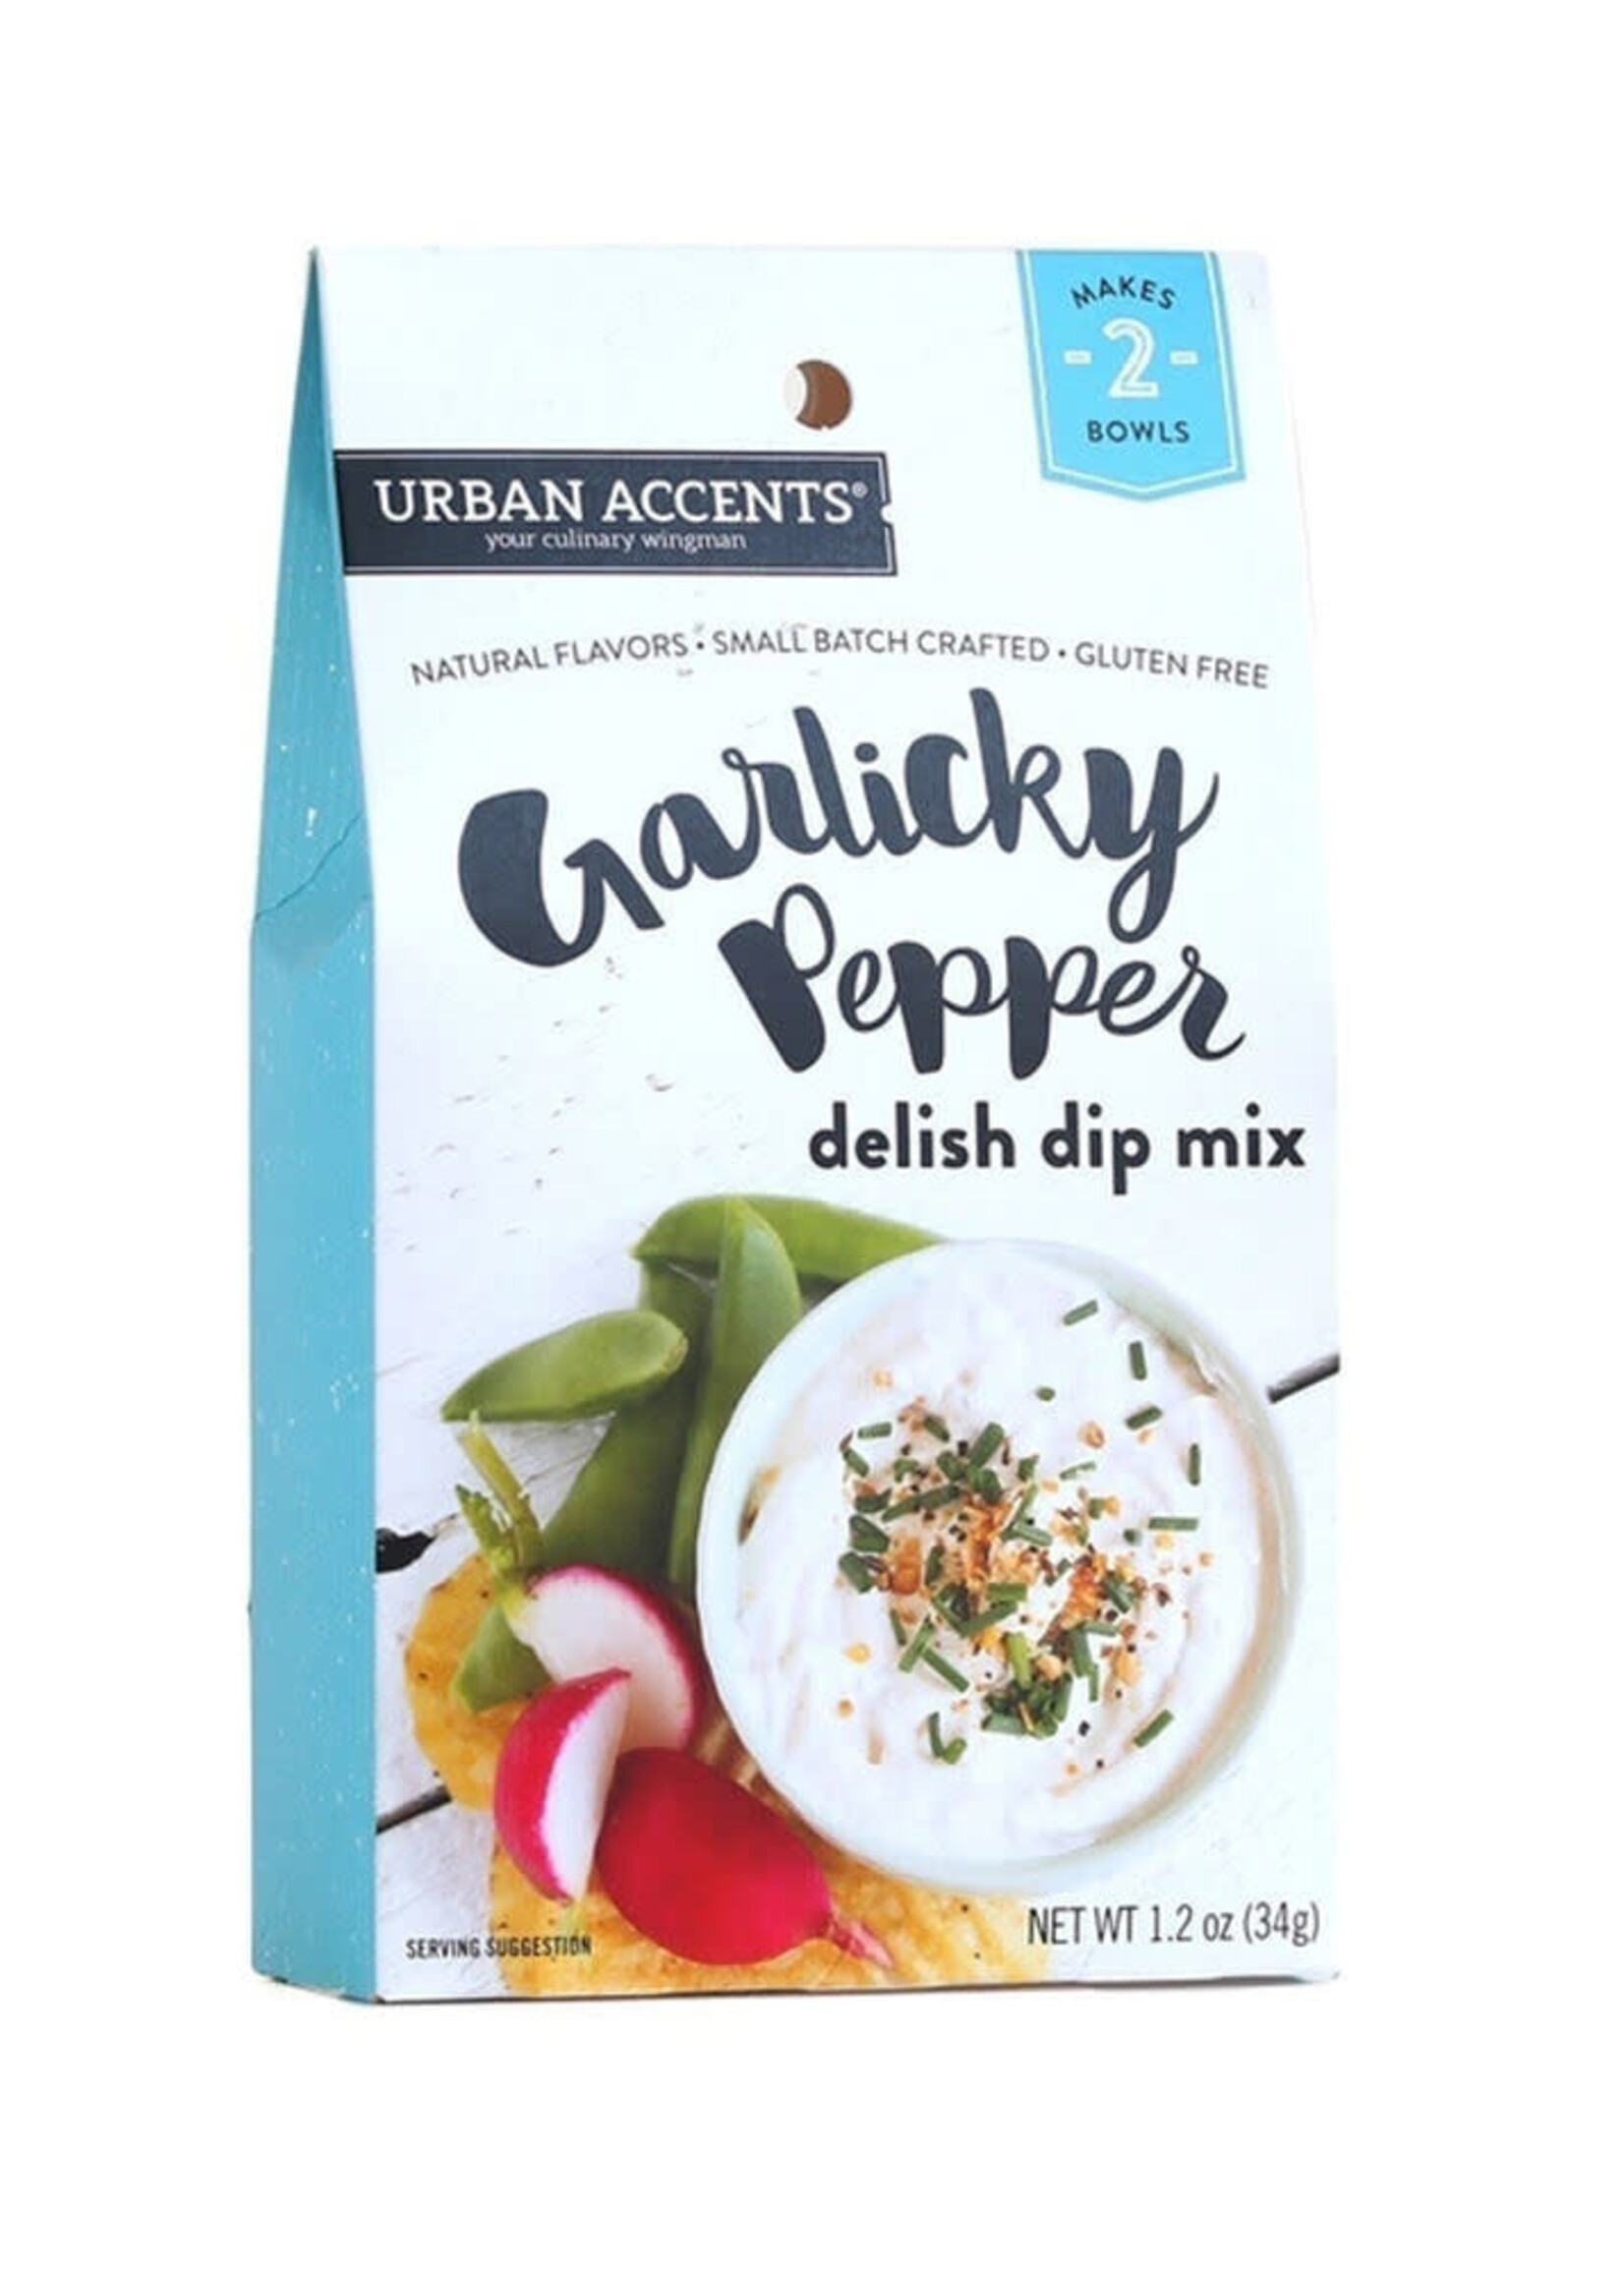 Urban Accents Garlicky Pepper Delish Dip Mix